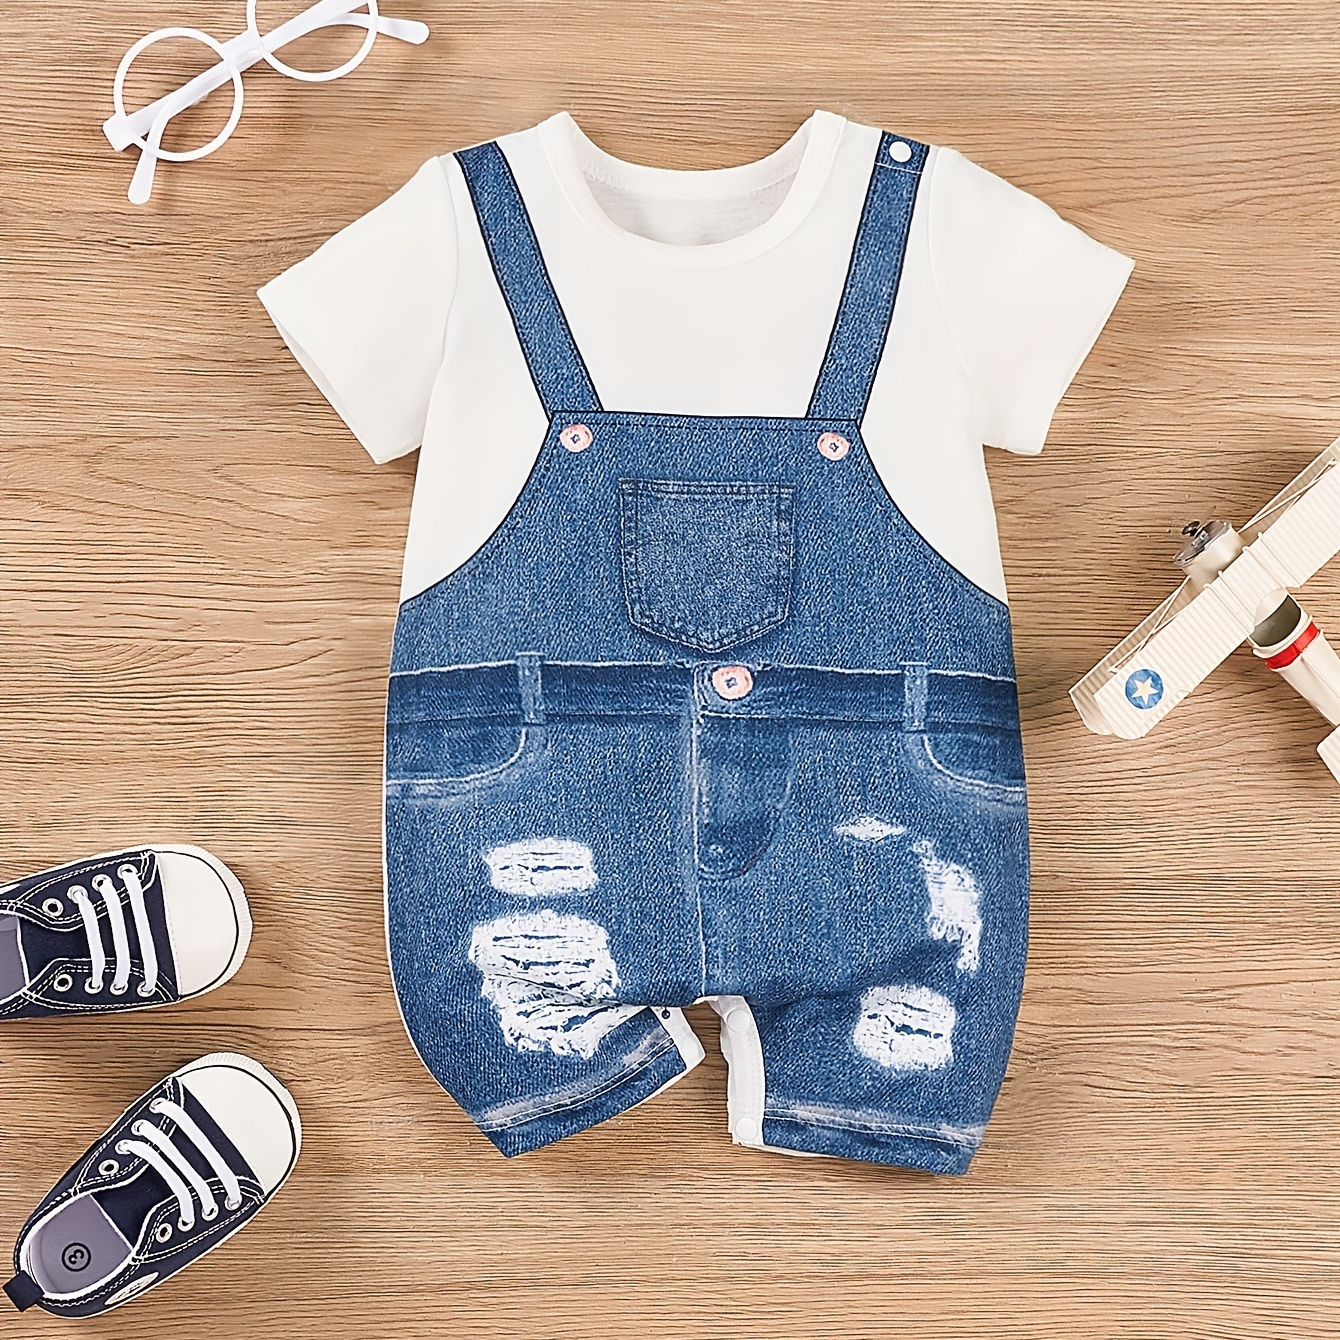 

Baby Boys' Casual Short Sleeve Romper, Denim Look With Ripped Pattern Print, Round Neck Onesie, Snap Closure, Infant Bodysuit Shorts, Summer Outfit For Newborn Boys